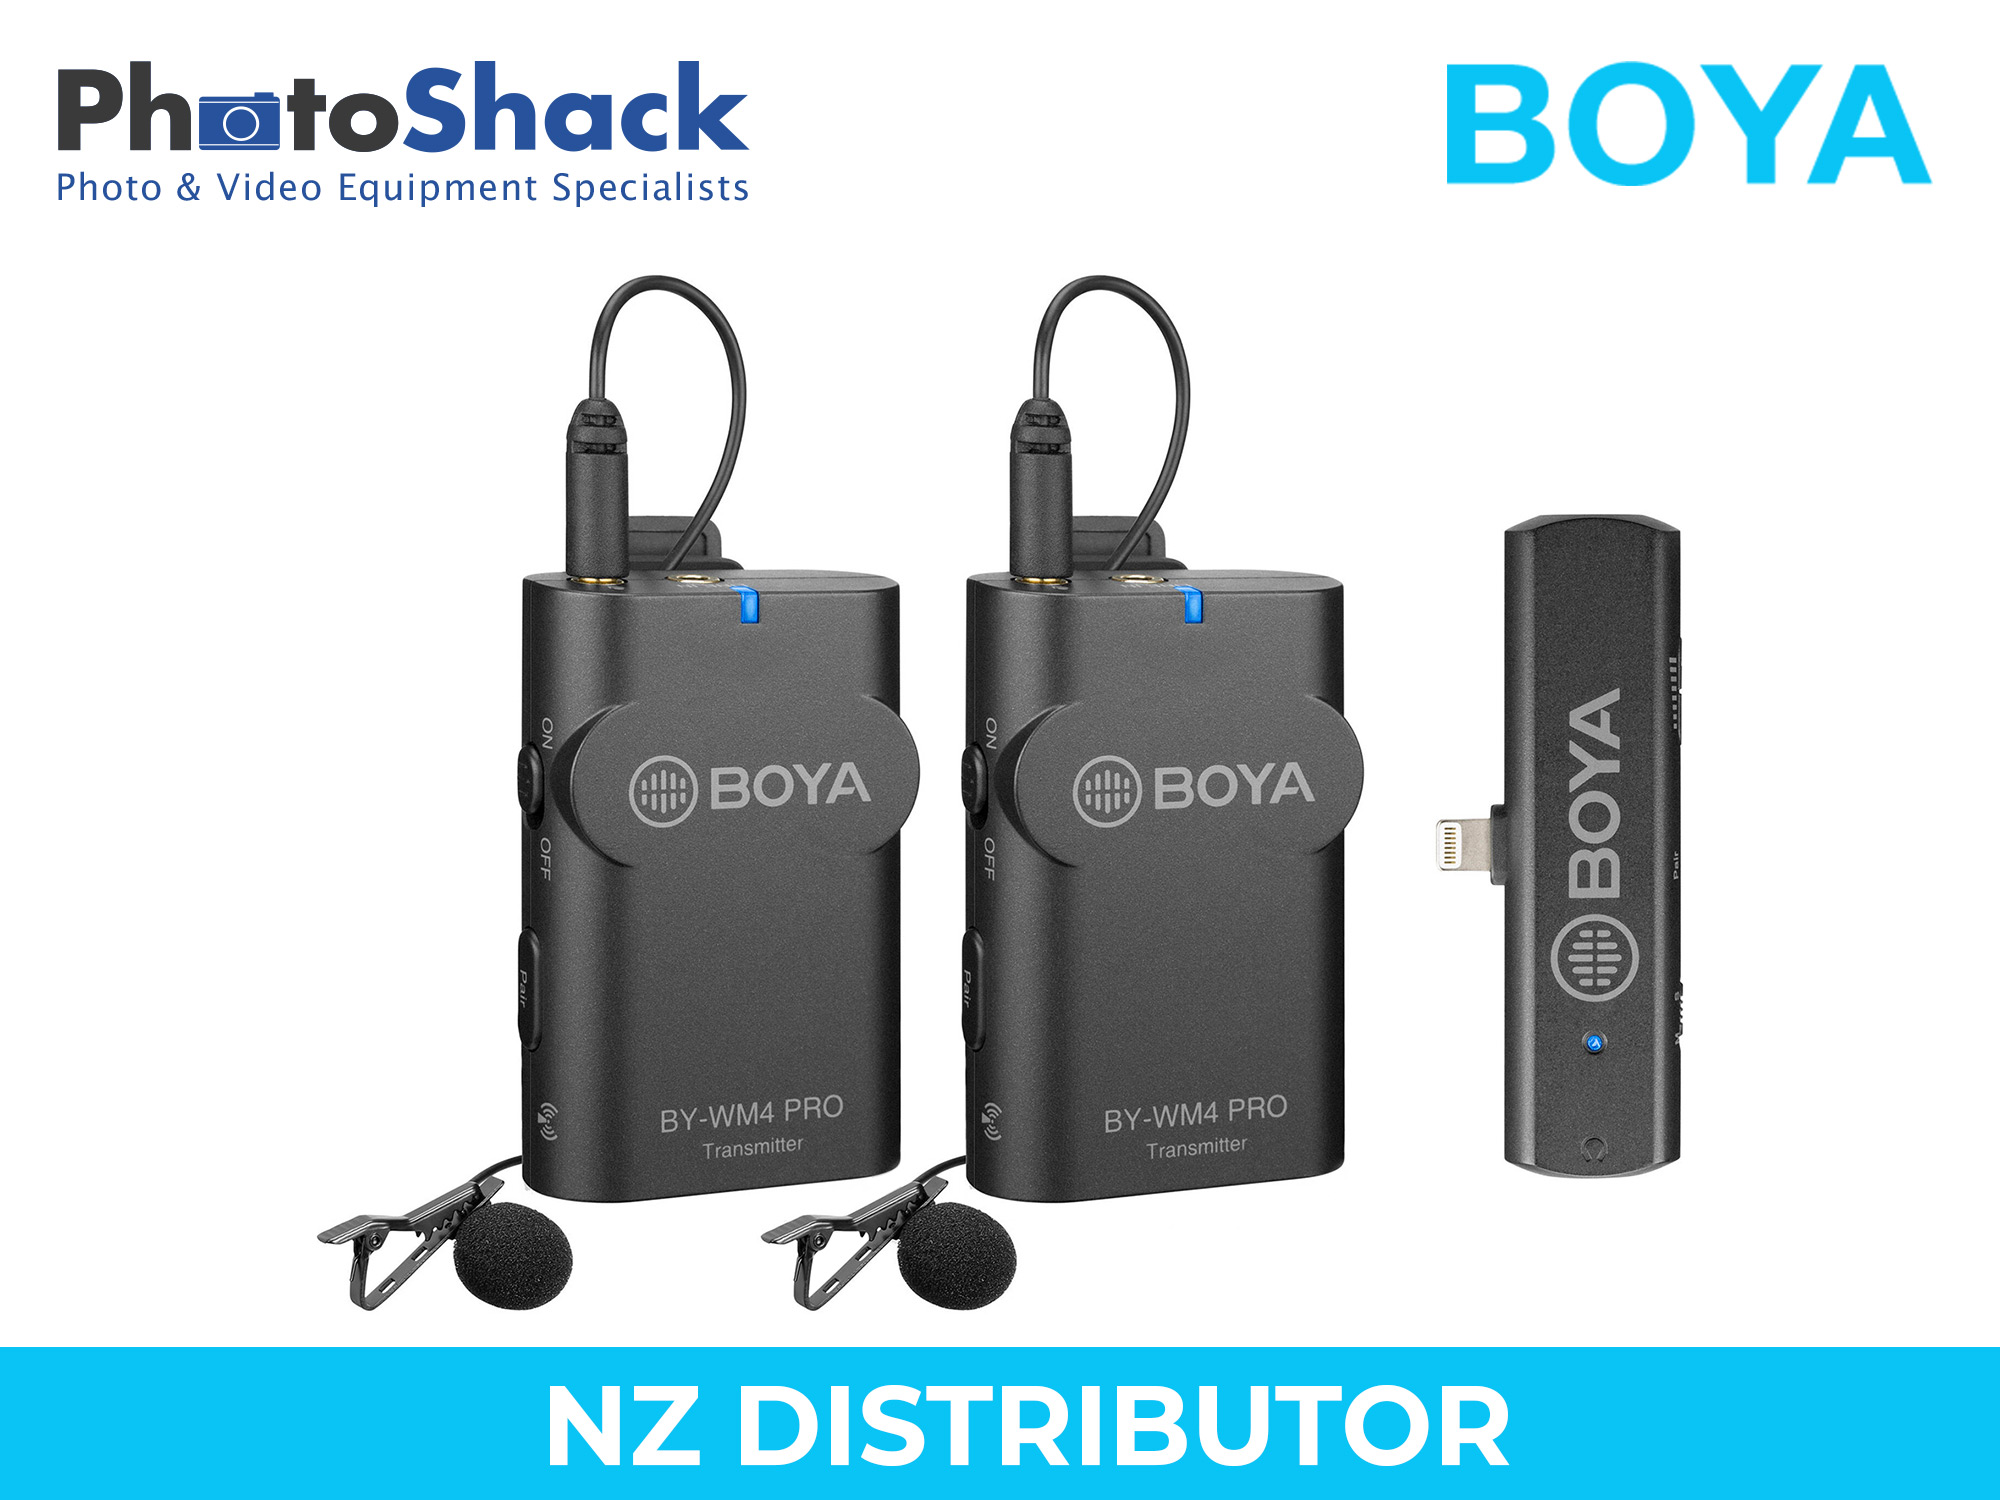 Boya BY-WM4 PRO K4 2.4 GHz Wireless Microphone System For iOS devices (2 Transmitters)